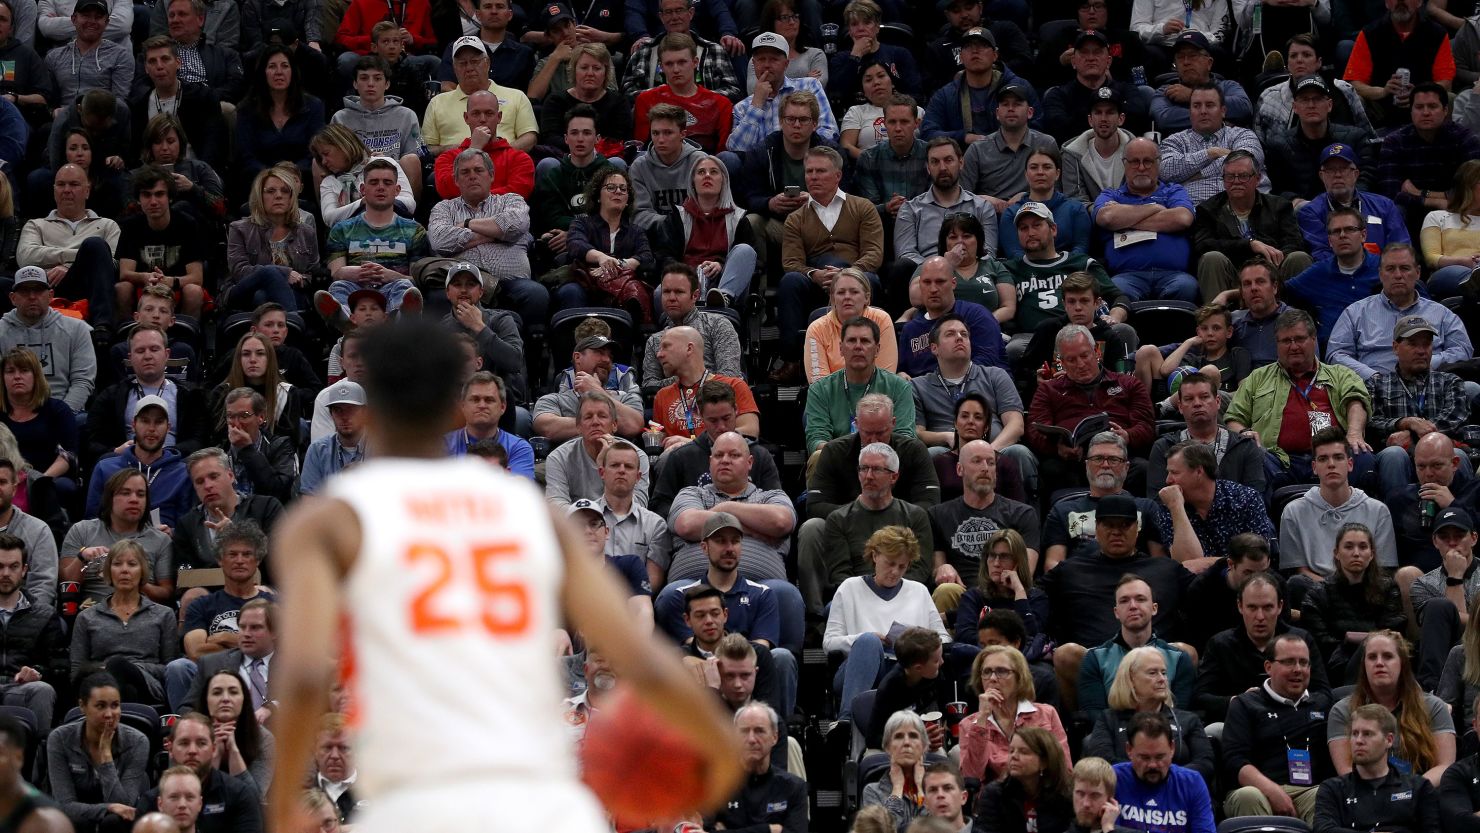 Crowds like this one, watching Syracuse play Baylor in March 2019, could be absent in this year's NCAA tournaments after a players' advocacy group requested empty arenas.